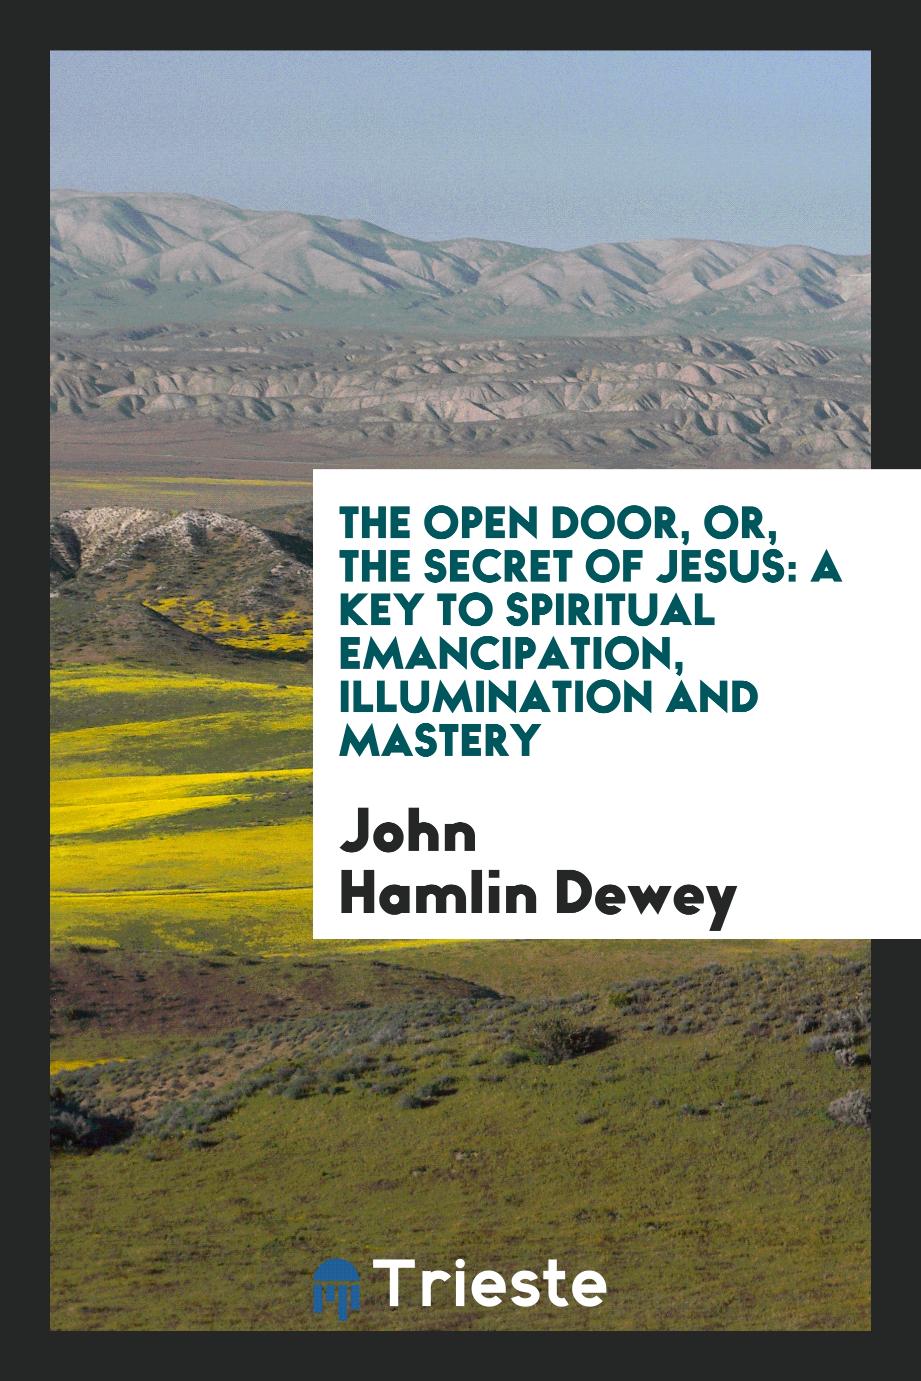 The Open Door, or, the Secret of Jesus: A Key to Spiritual Emancipation, Illumination and Mastery